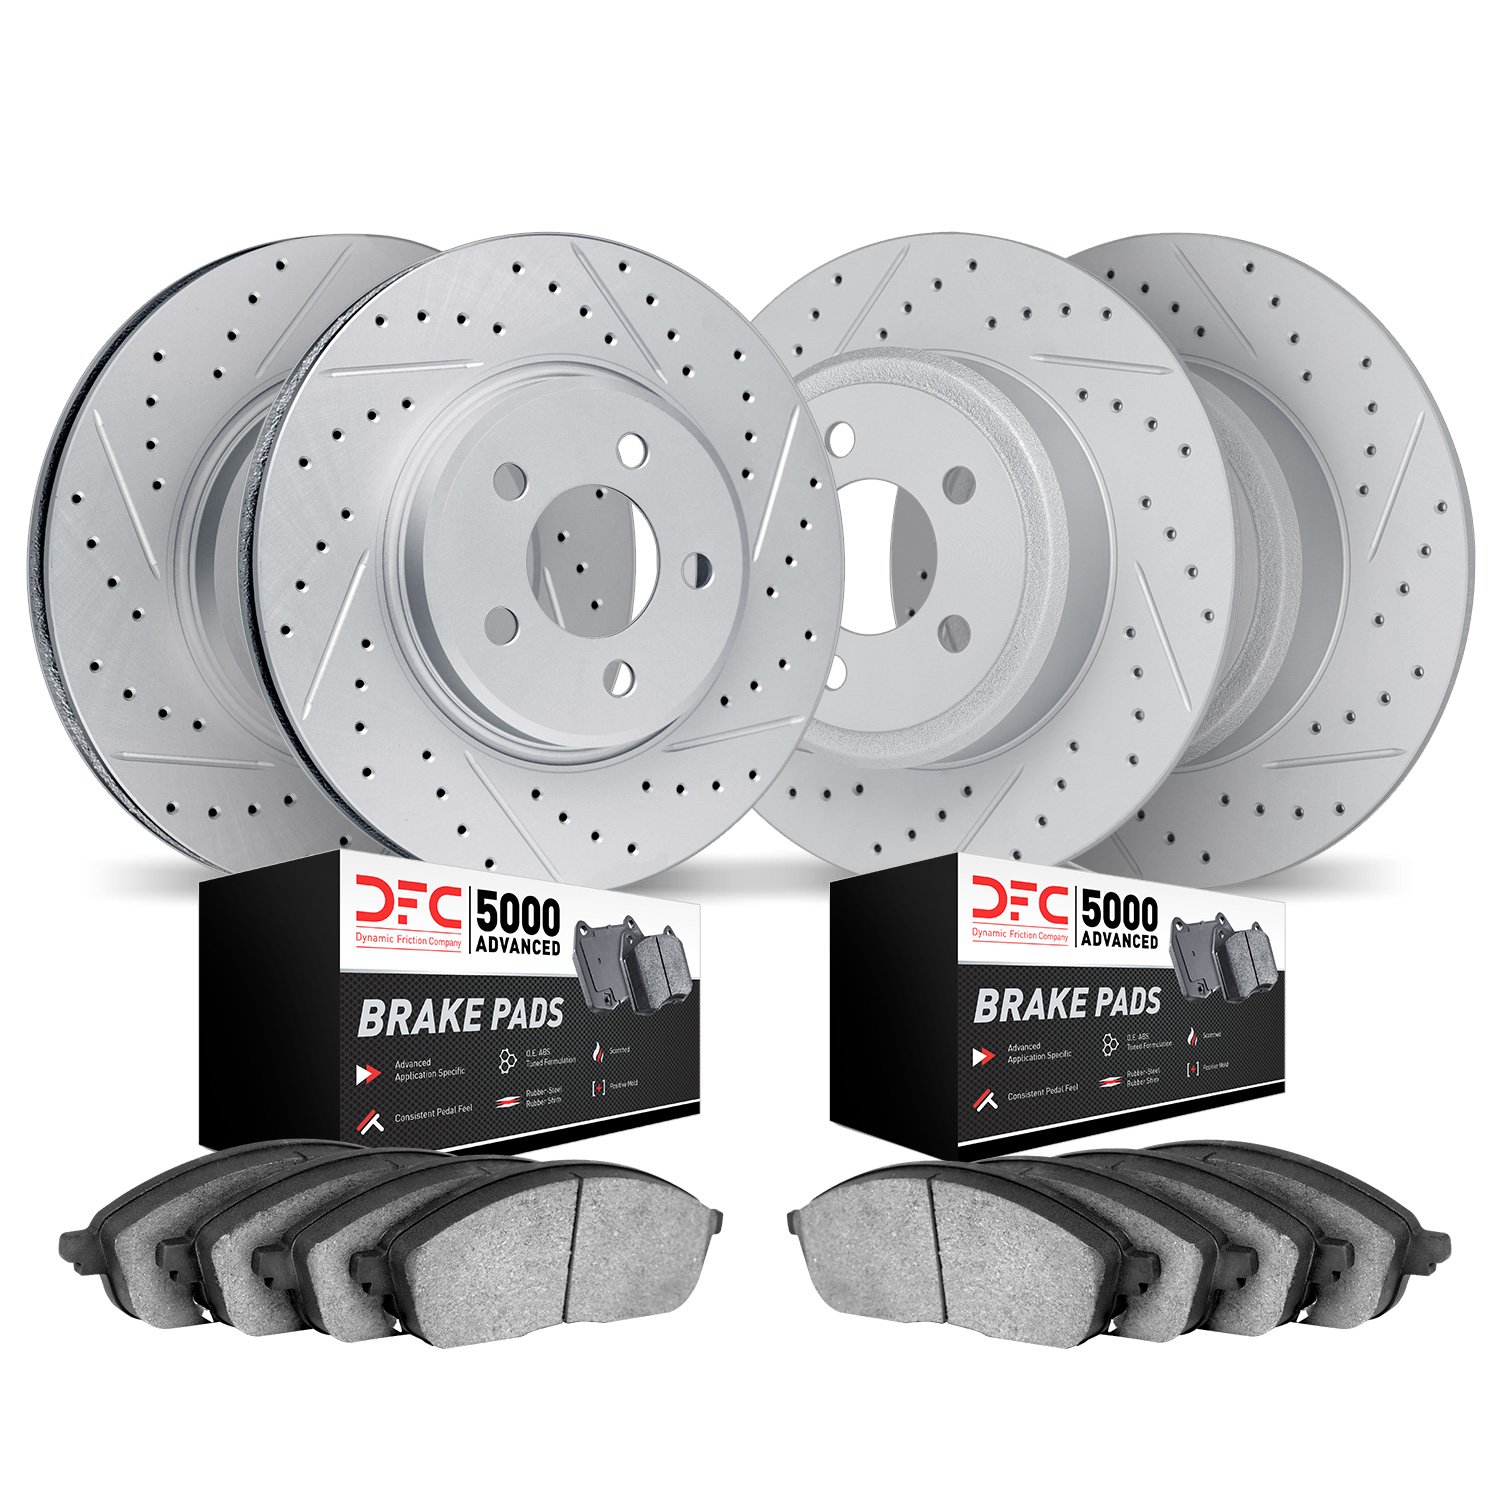 2504-74041 Geoperformance Drilled/Slotted Rotors w/5000 Advanced Brake Pads Kit, 2006-2017 Audi/Volkswagen, Position: Front and